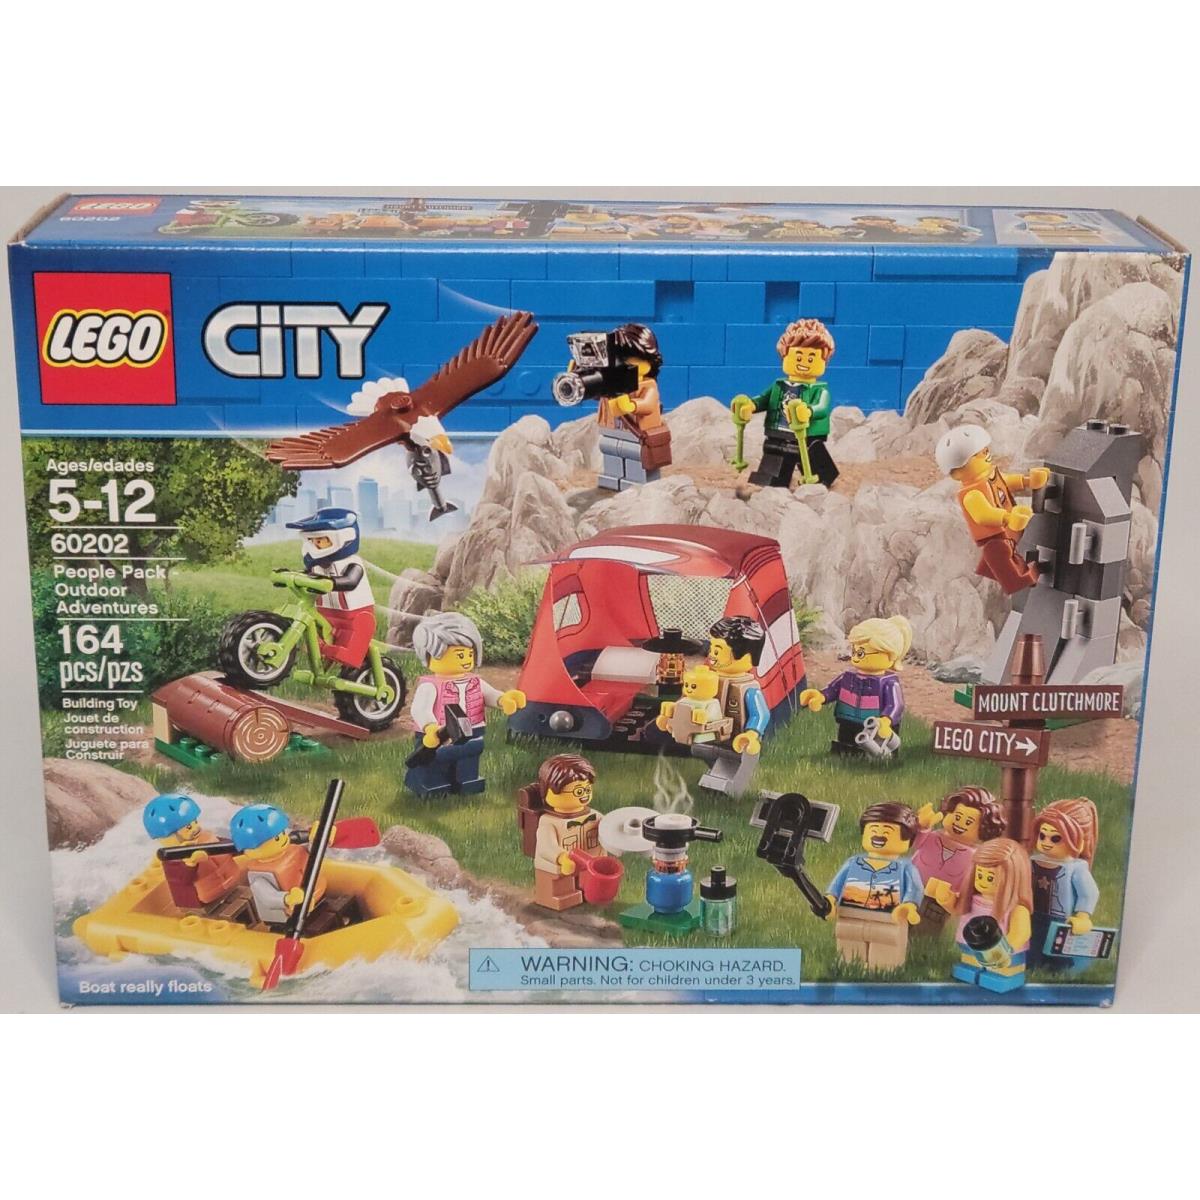 Lego 60202 People Pack - Outdoor Adventures City Baby Eagle Tent Dinghy